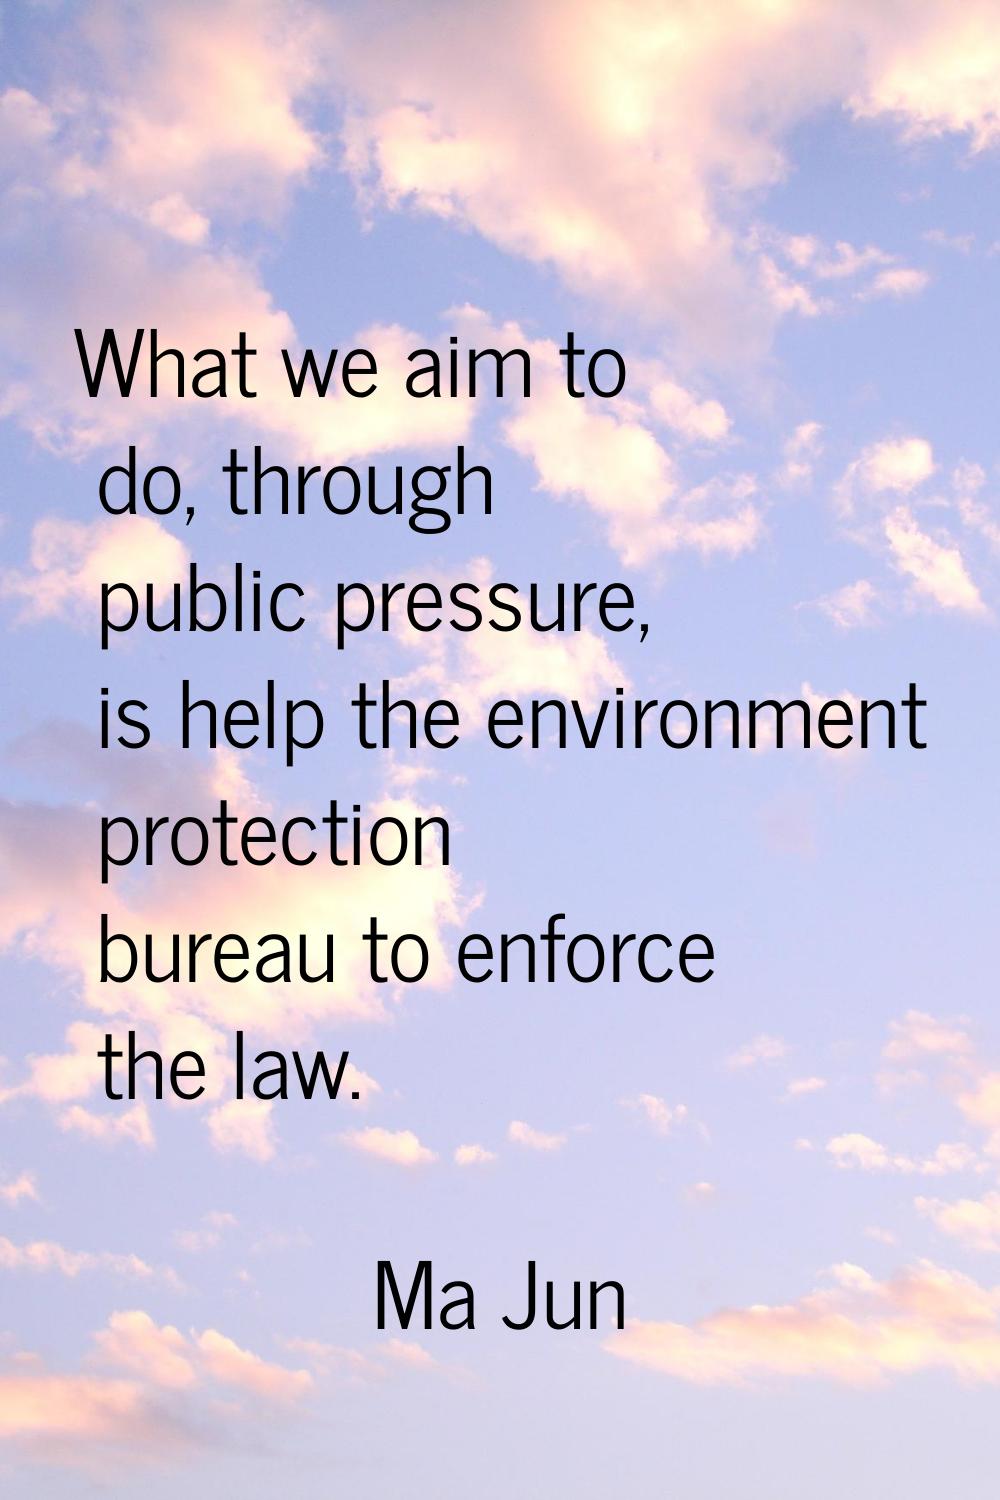 What we aim to do, through public pressure, is help the environment protection bureau to enforce th